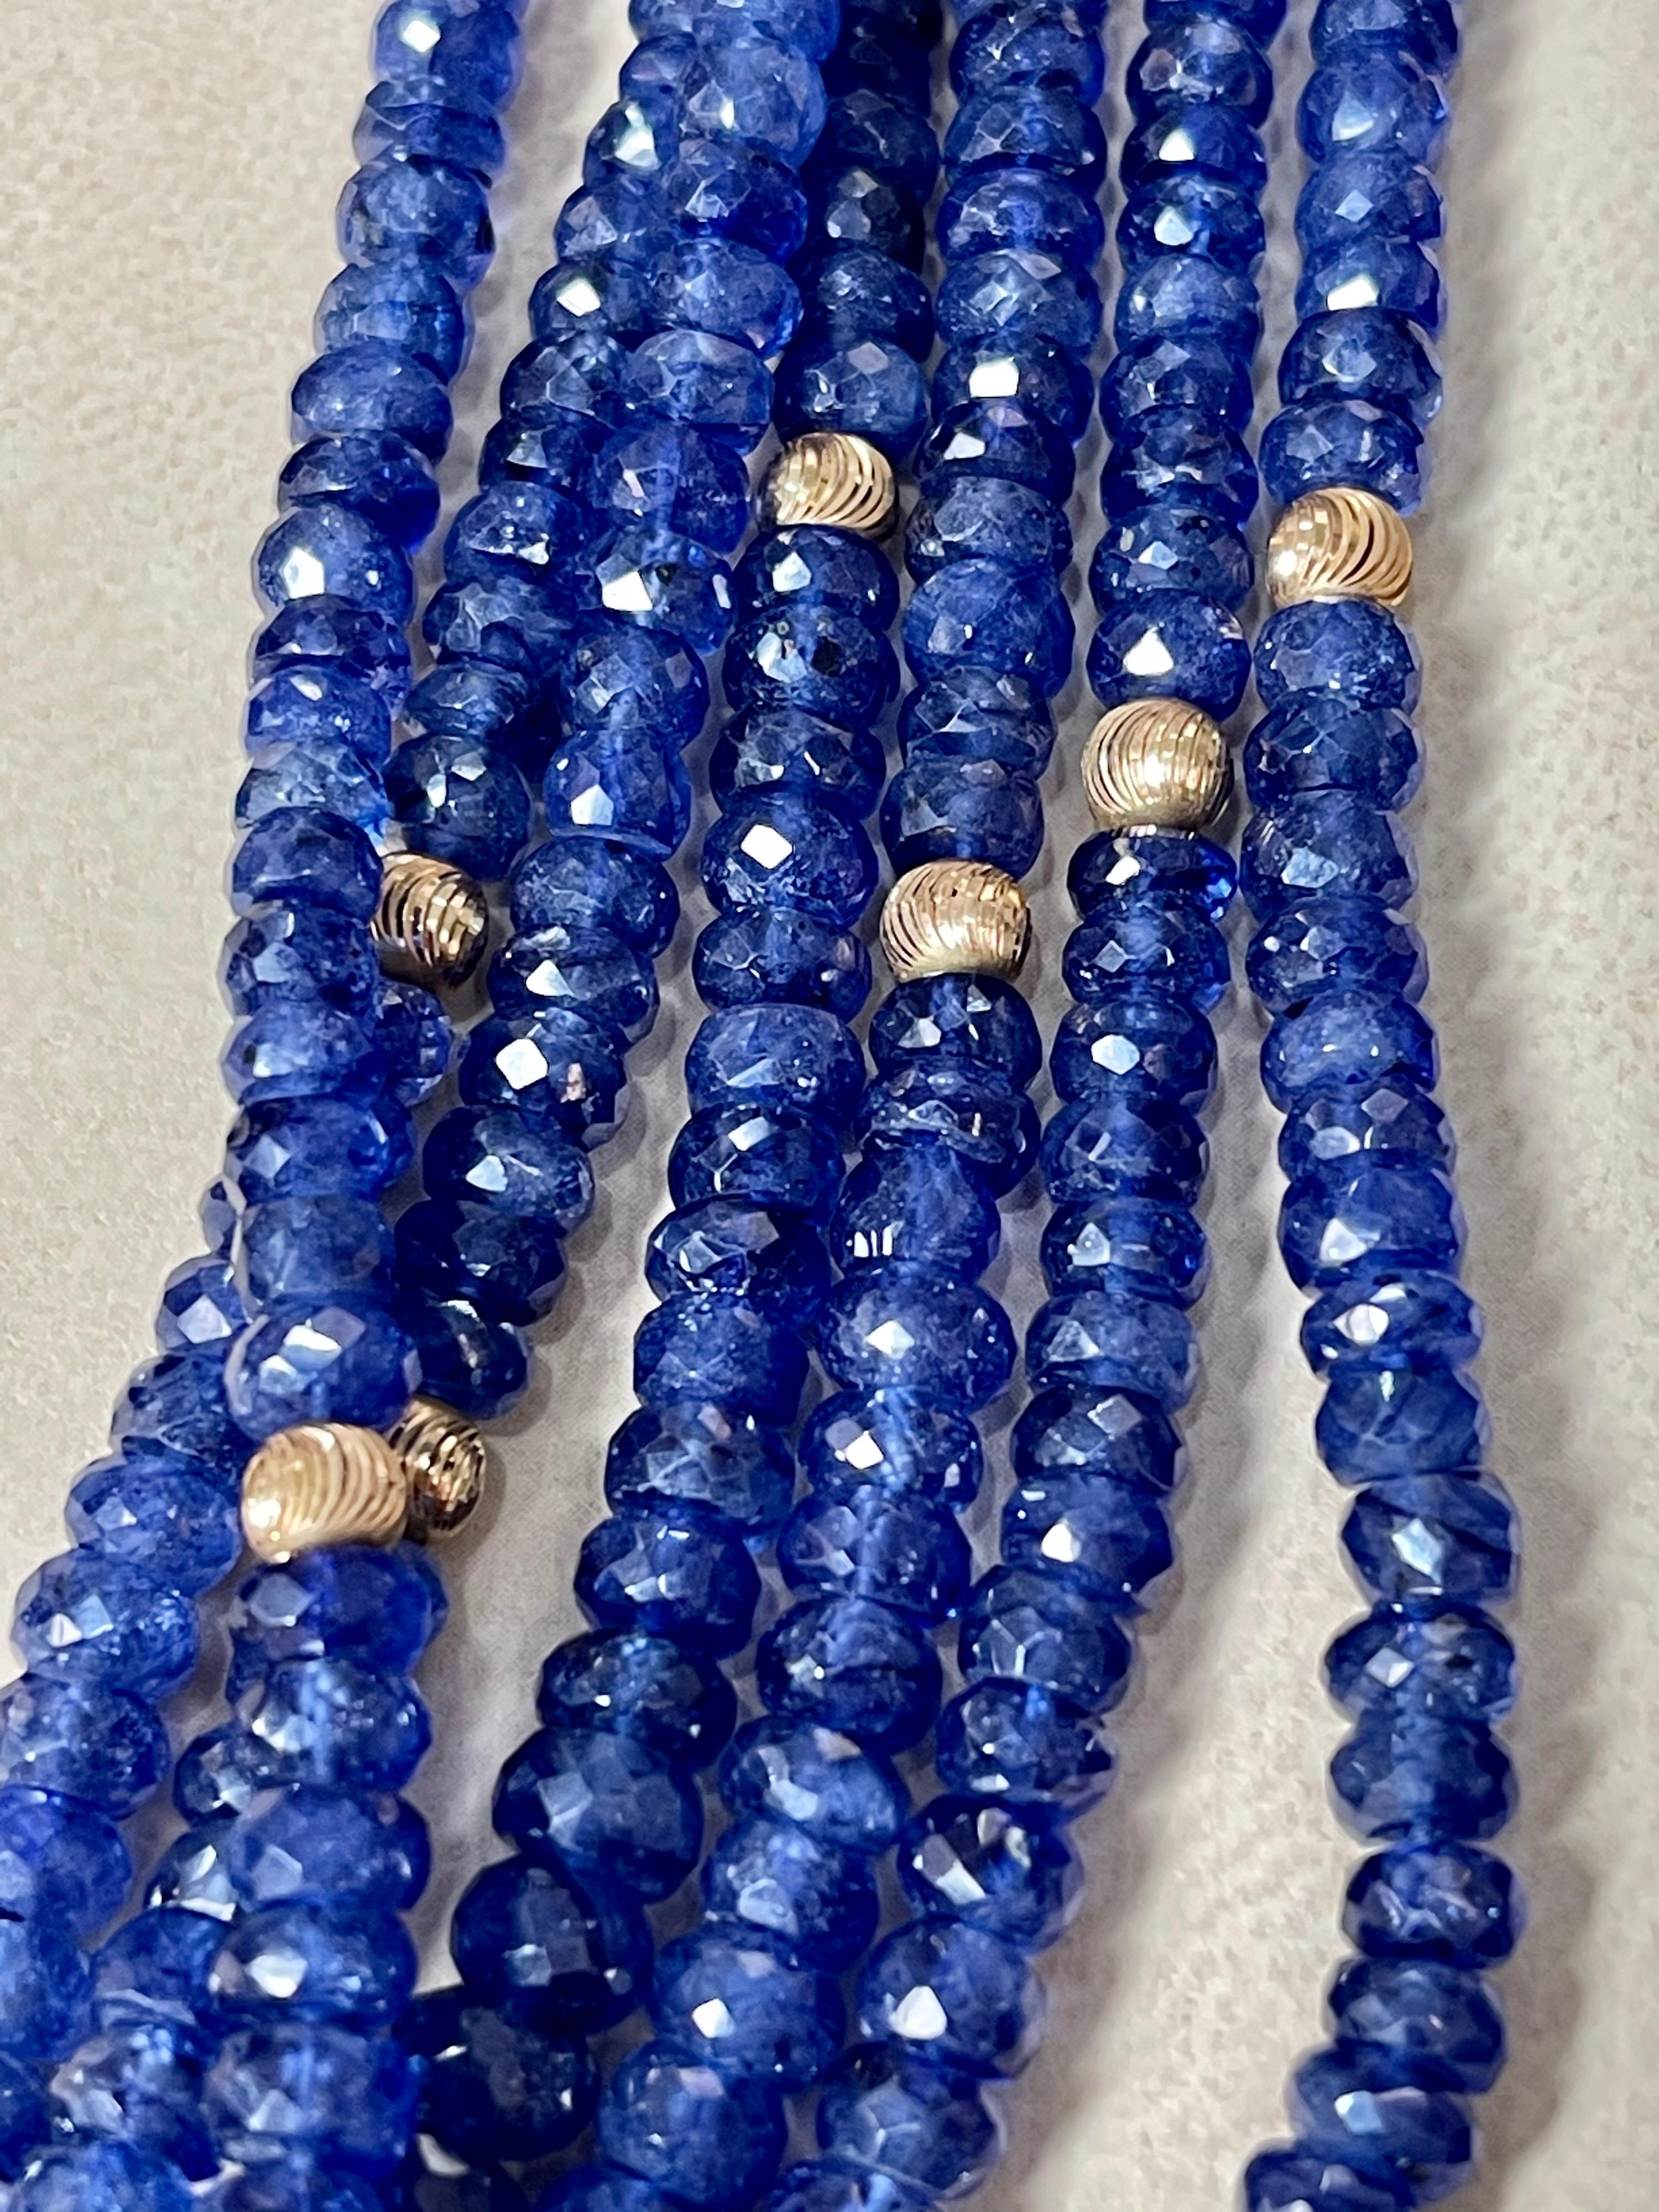 Twisted 1275 Ct Natural Tanzanite Bead Seven Strand Necklace + 15 Gm 14 K Y Gold For Sale 3